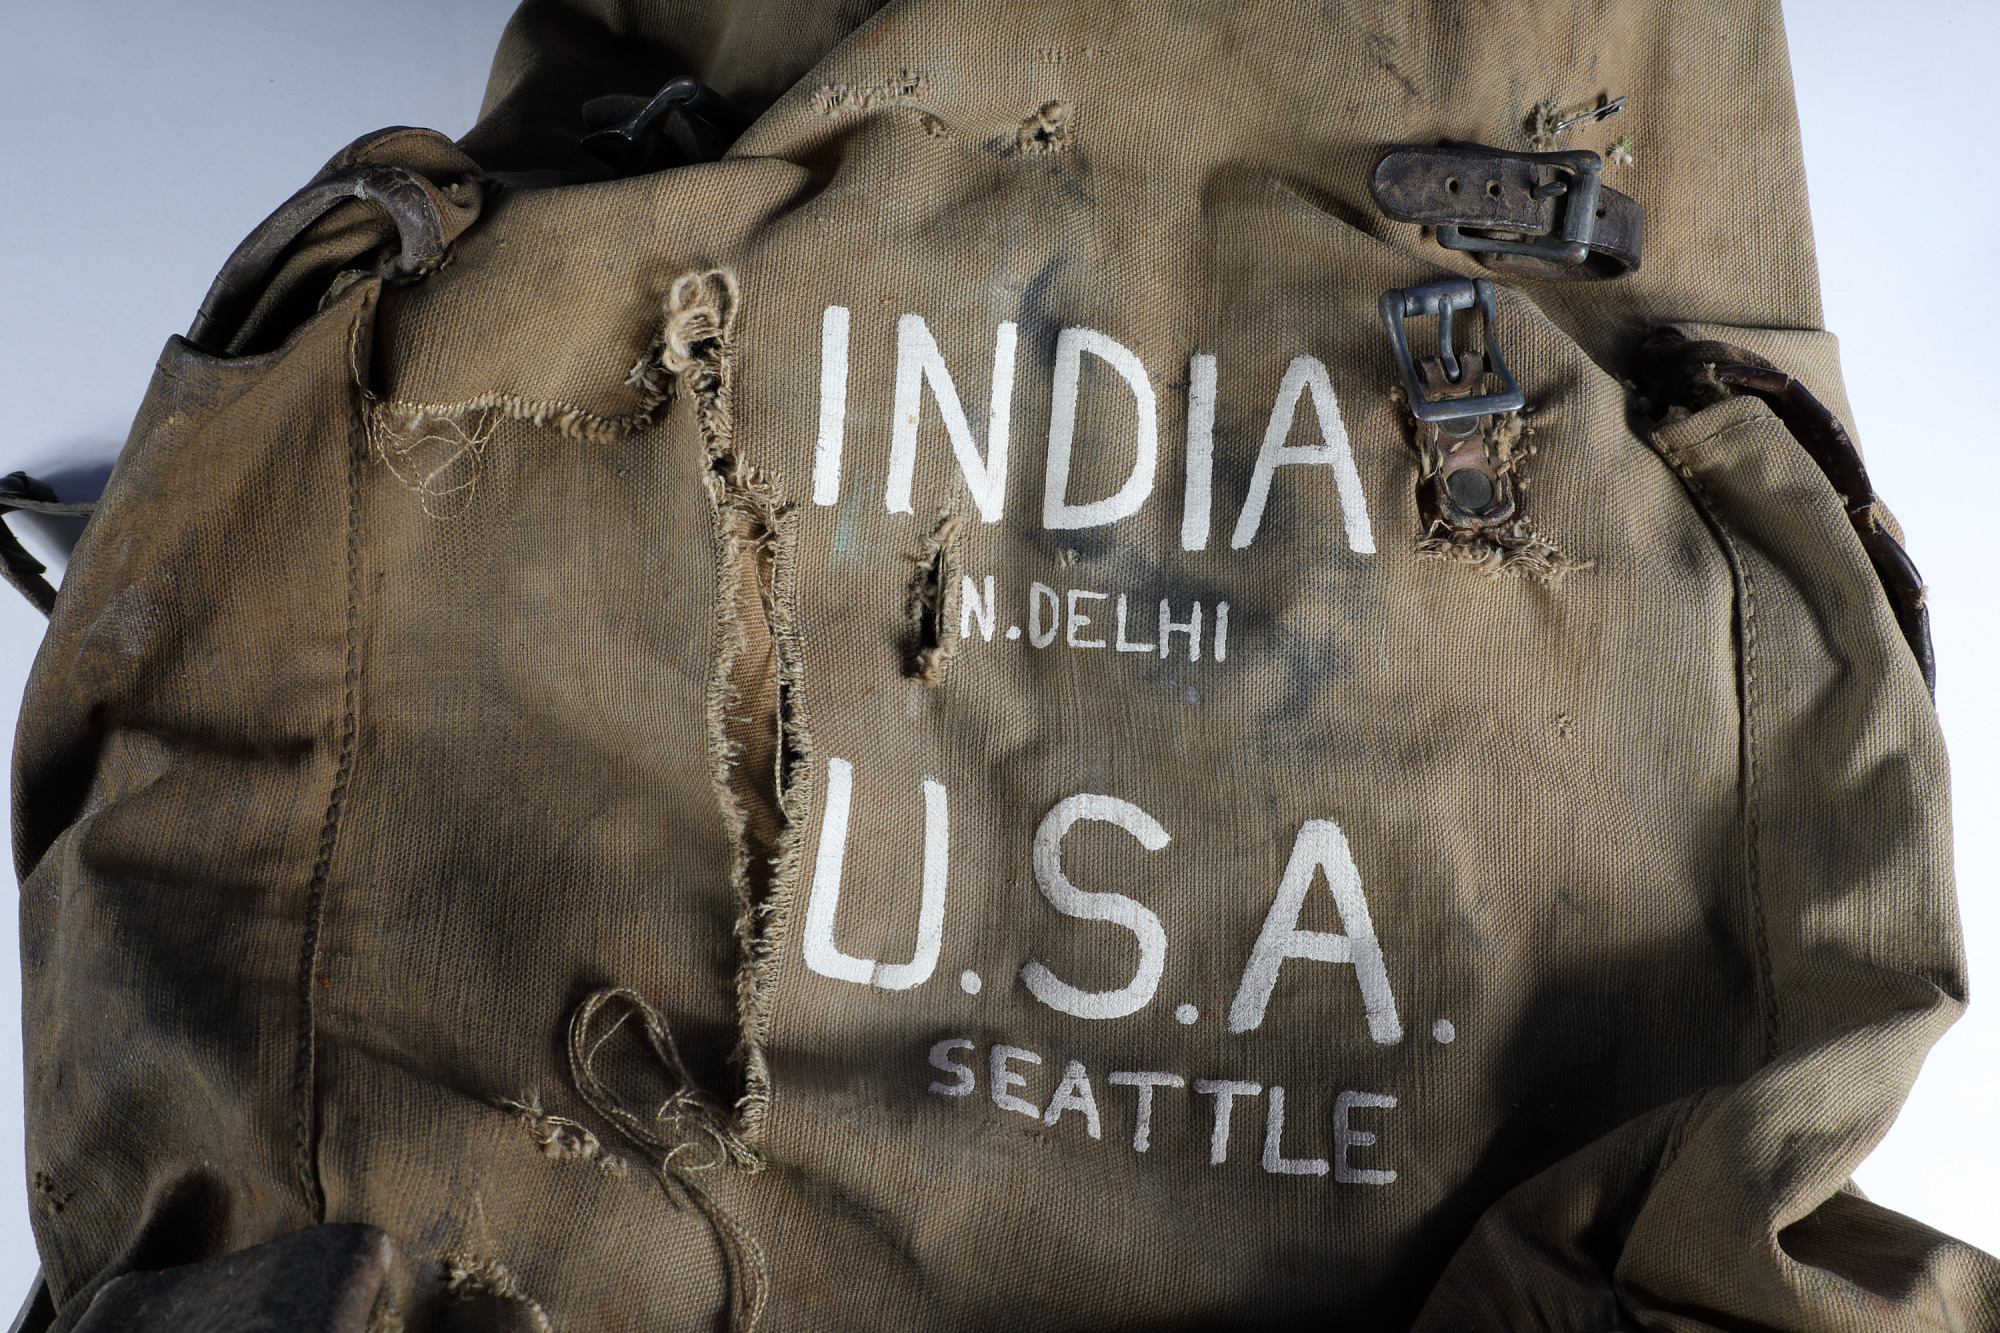 A worn, torn backpack with INDIA NEW DELHI U.S.A. SEATTLE printed on the front. 